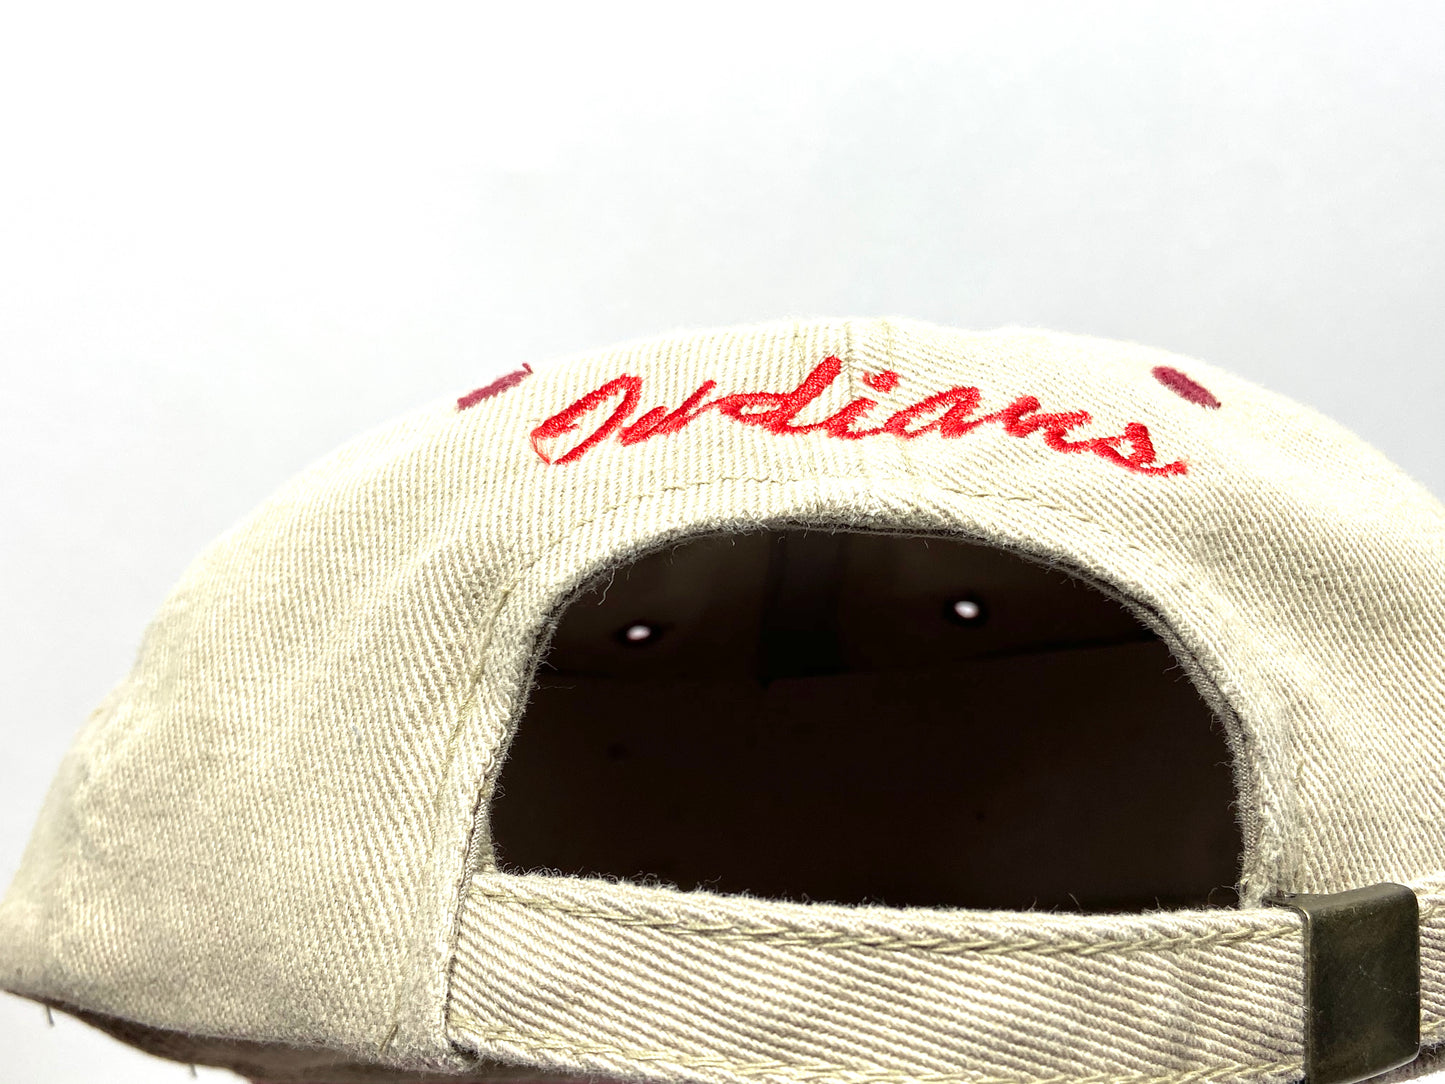 Cleveland Indians Vintage MLB Cotton Wahoo Hat by Logo 7